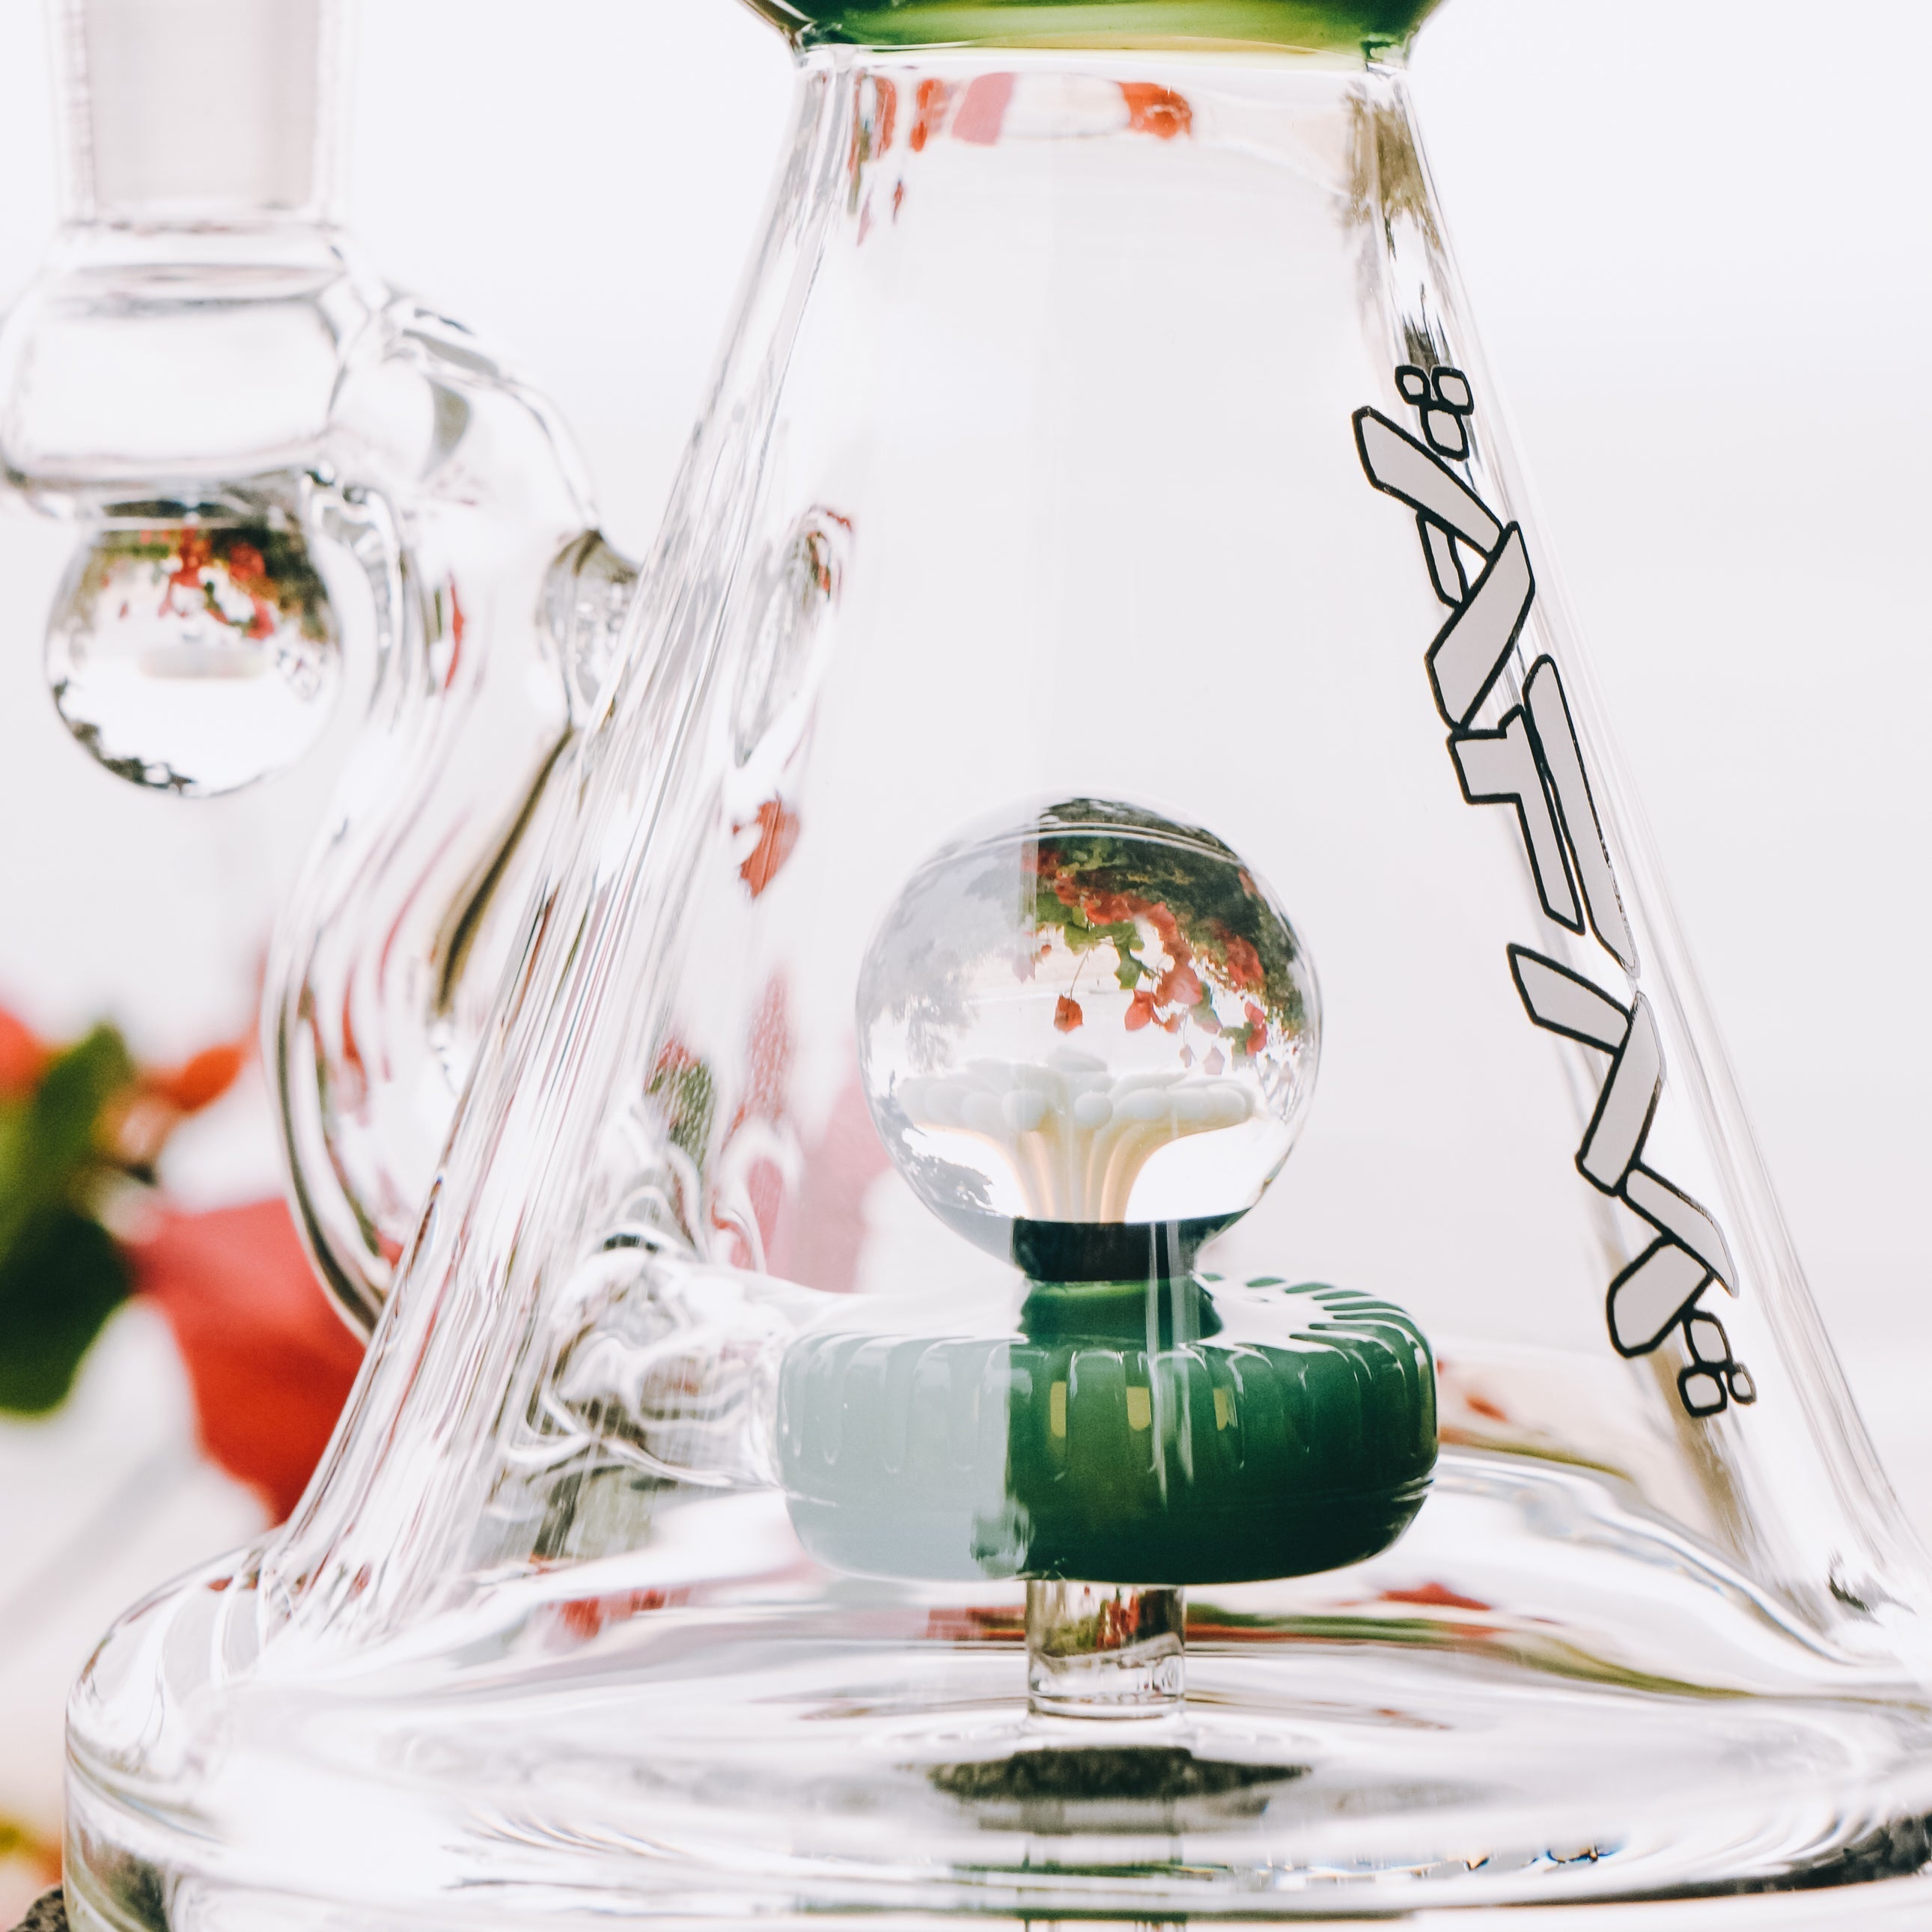 afm glass Scientific Glass Rigs & Beakers collection - thick heavy duty borosilicate glass